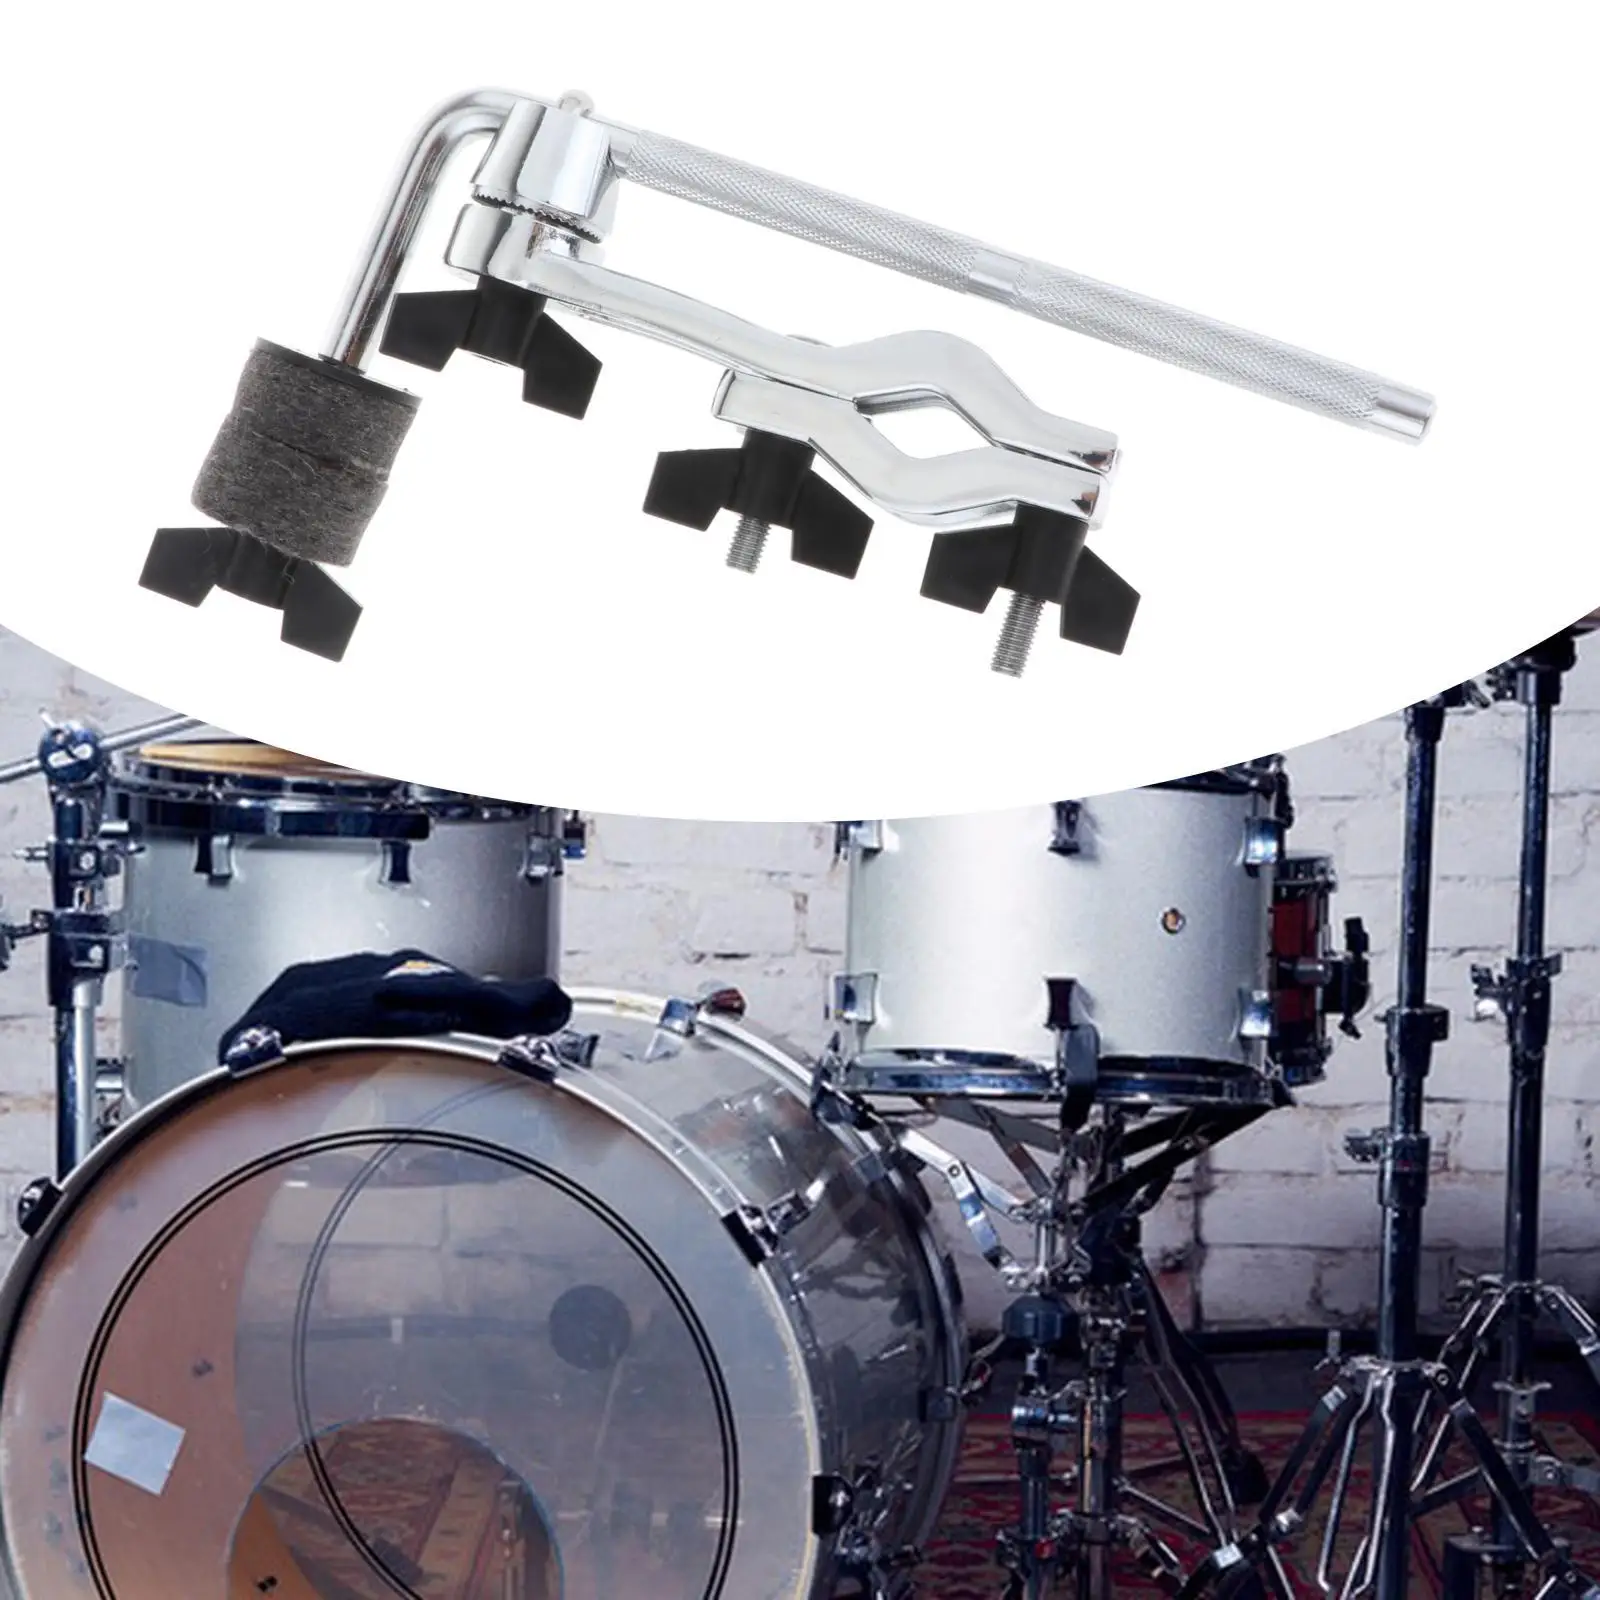 Connecting Drums Clamp Drum Multi Clamp for Connecting Percussion Drum